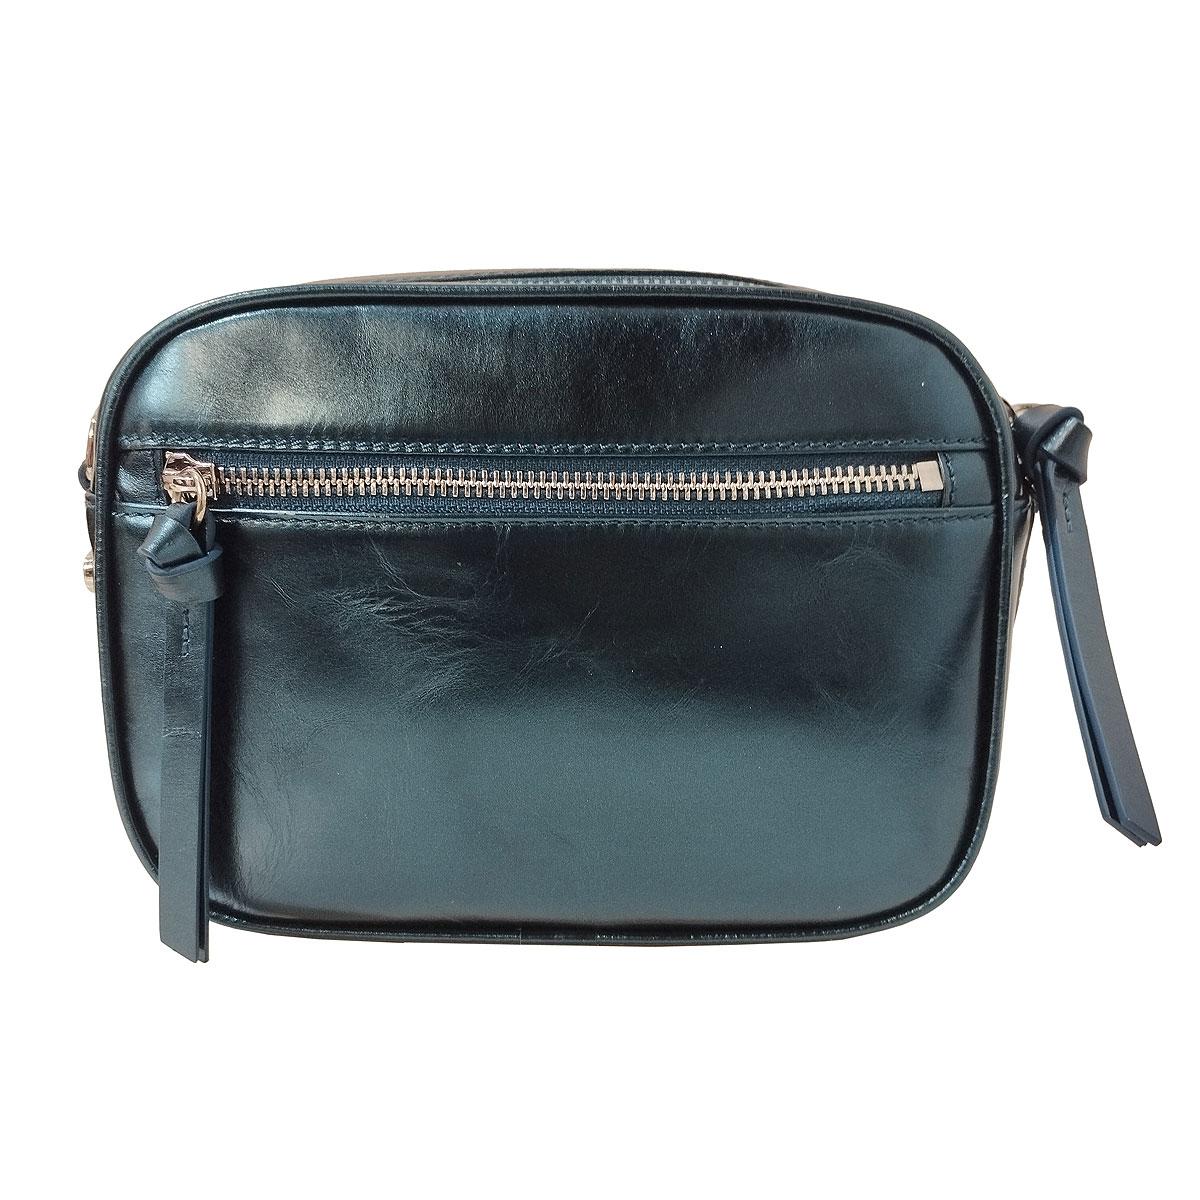 BEautiful camera bag by Vivienne Westwood
Leather
Metal green color
VW Logo
Zip closure
External zip pocket
Can be carried by hand or crossbody
Internal pocket
Cm 20 x 16 x 6 (7,8 x 6,29 x 2,36 inches)
With dustbag
Express shipping included in the